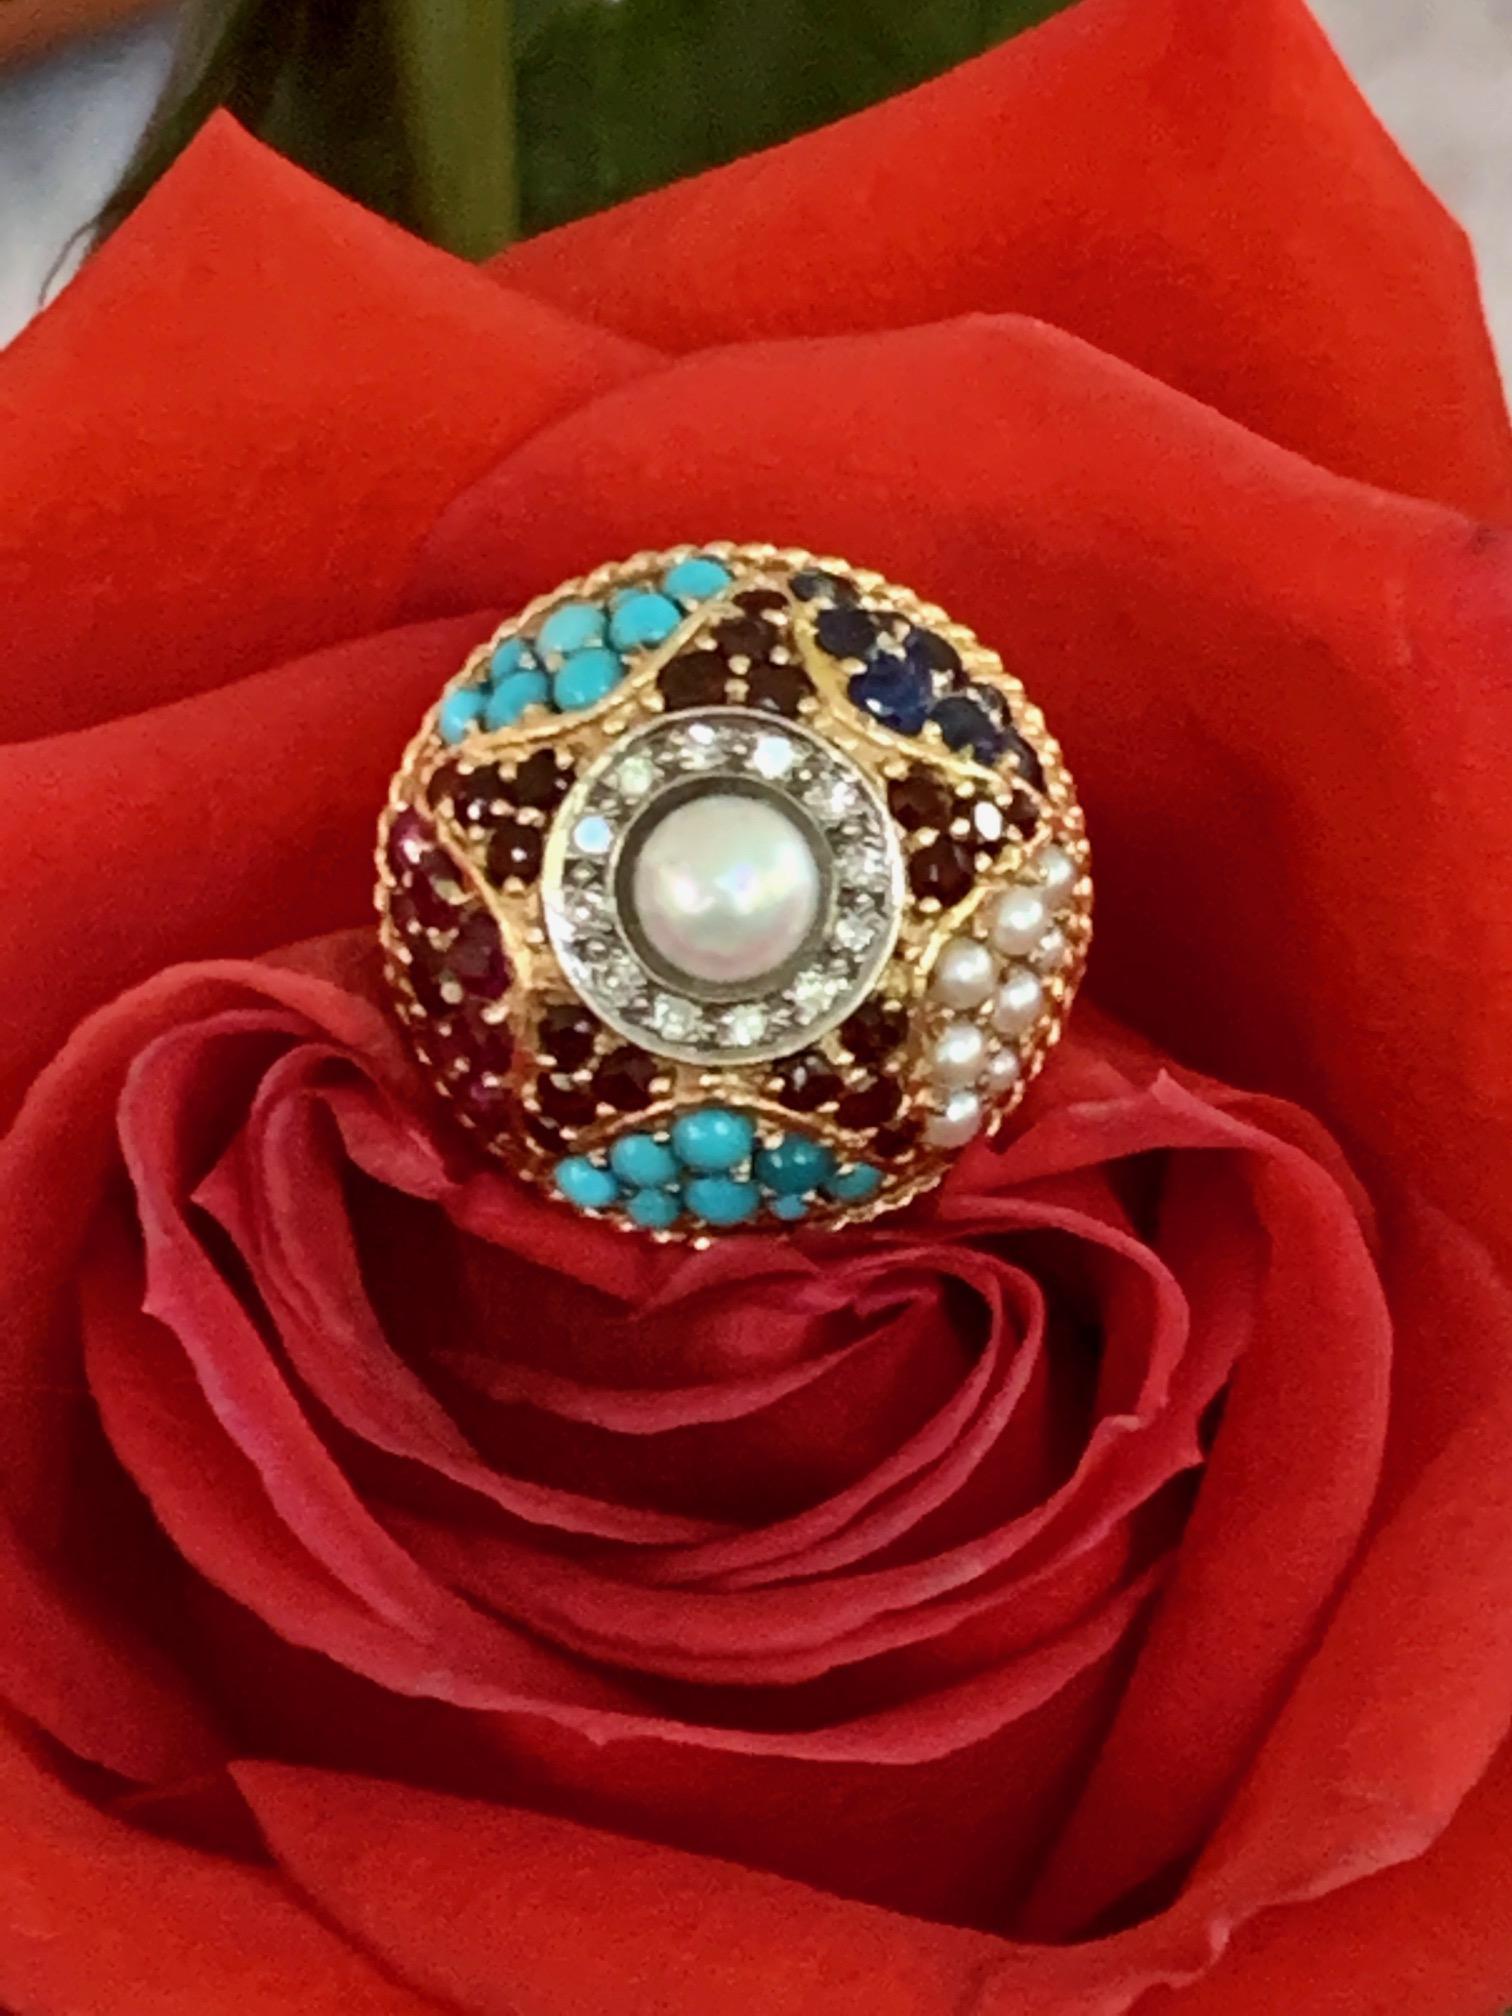 Garnet, Pearl, Turquoise, Sapphire, Ruby &Diamond 14K Yellow Gold Ring -Sz 5 1/2 In Excellent Condition In St. Louis Park, MN